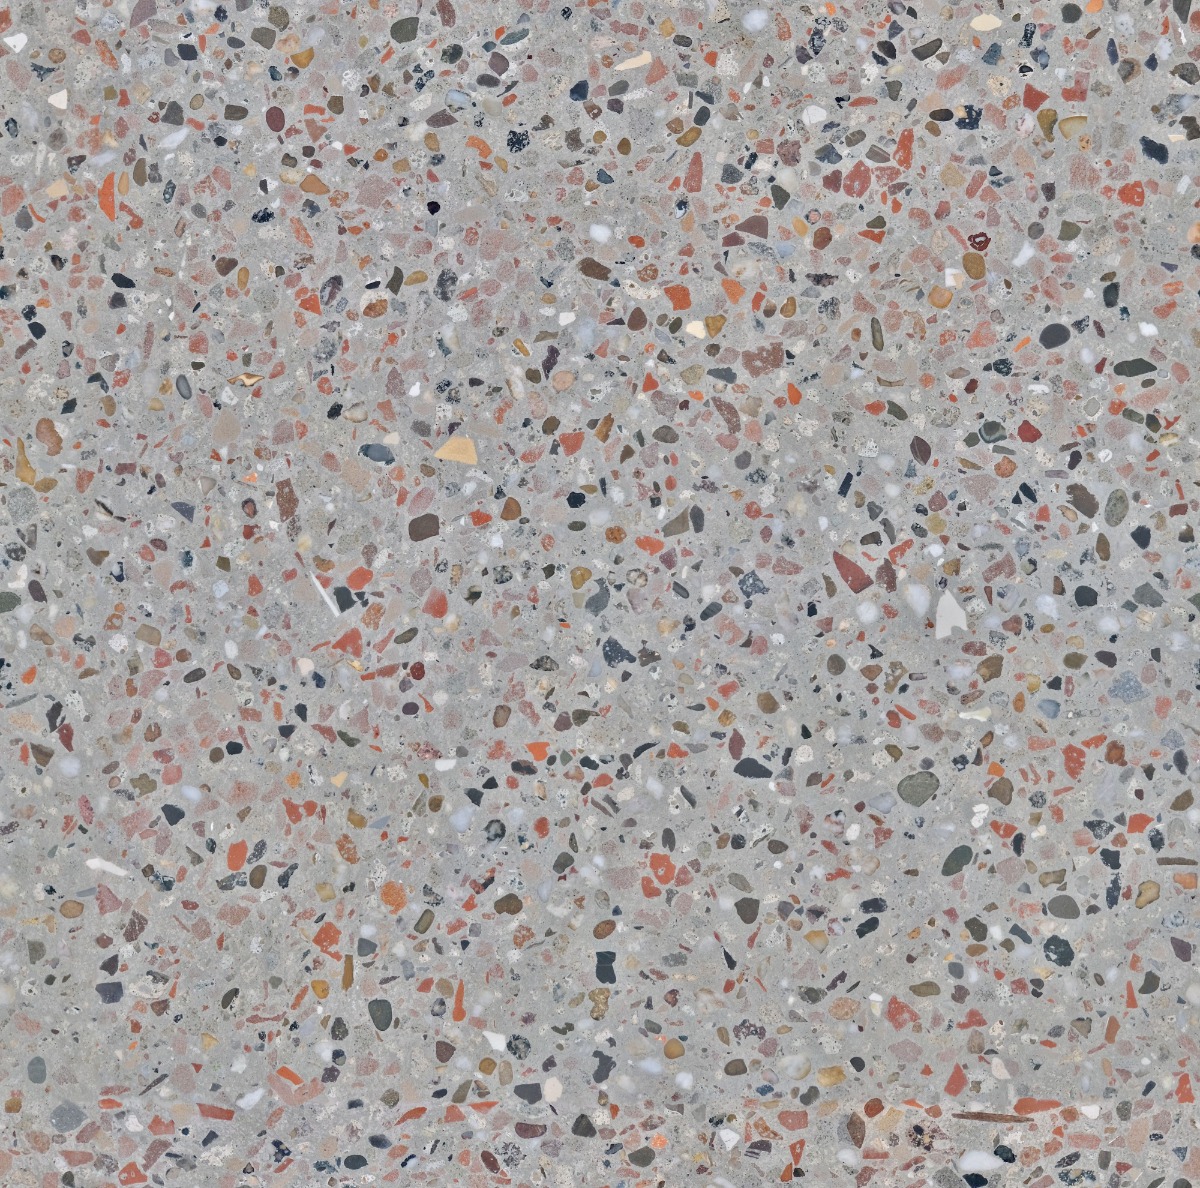 A seamless terrazzo texture with recycled masonry terrazzo 1001-mg-4-8 units arranged in a None pattern